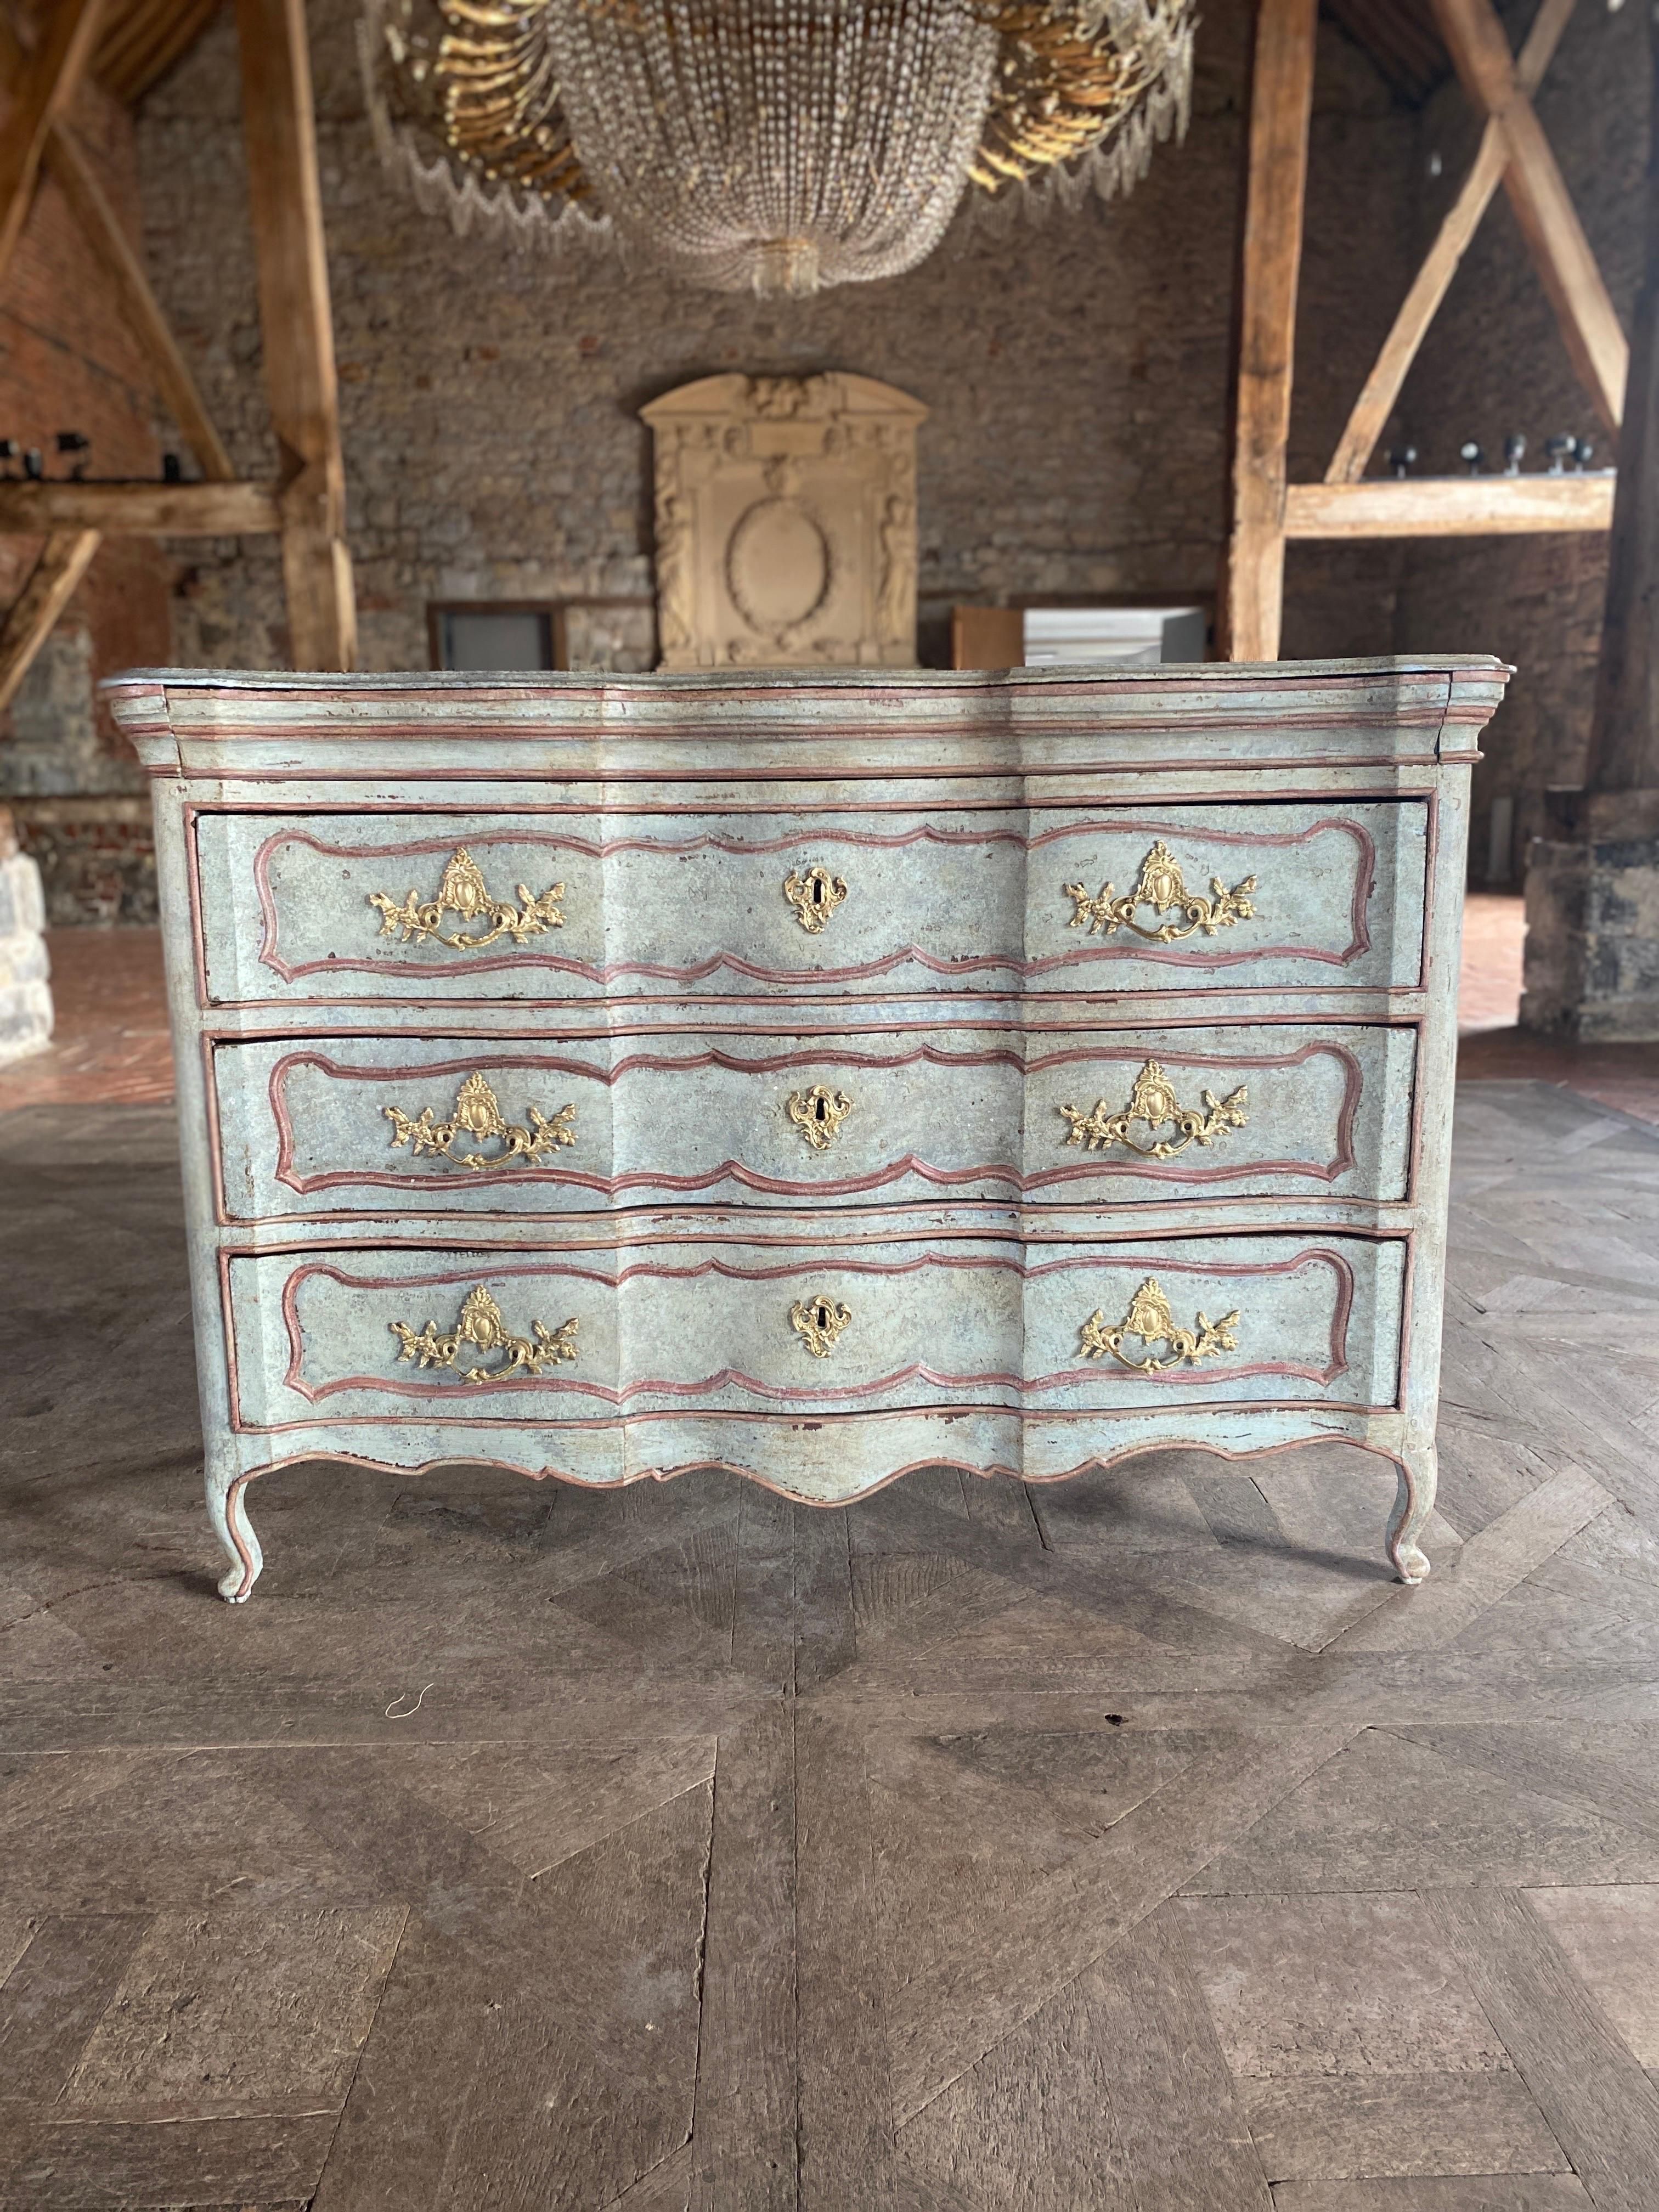 very pretty curved Louis XV patinated chest of drawers dating from the 18th century opening with 4 drawers very pretty patina high quality hardware